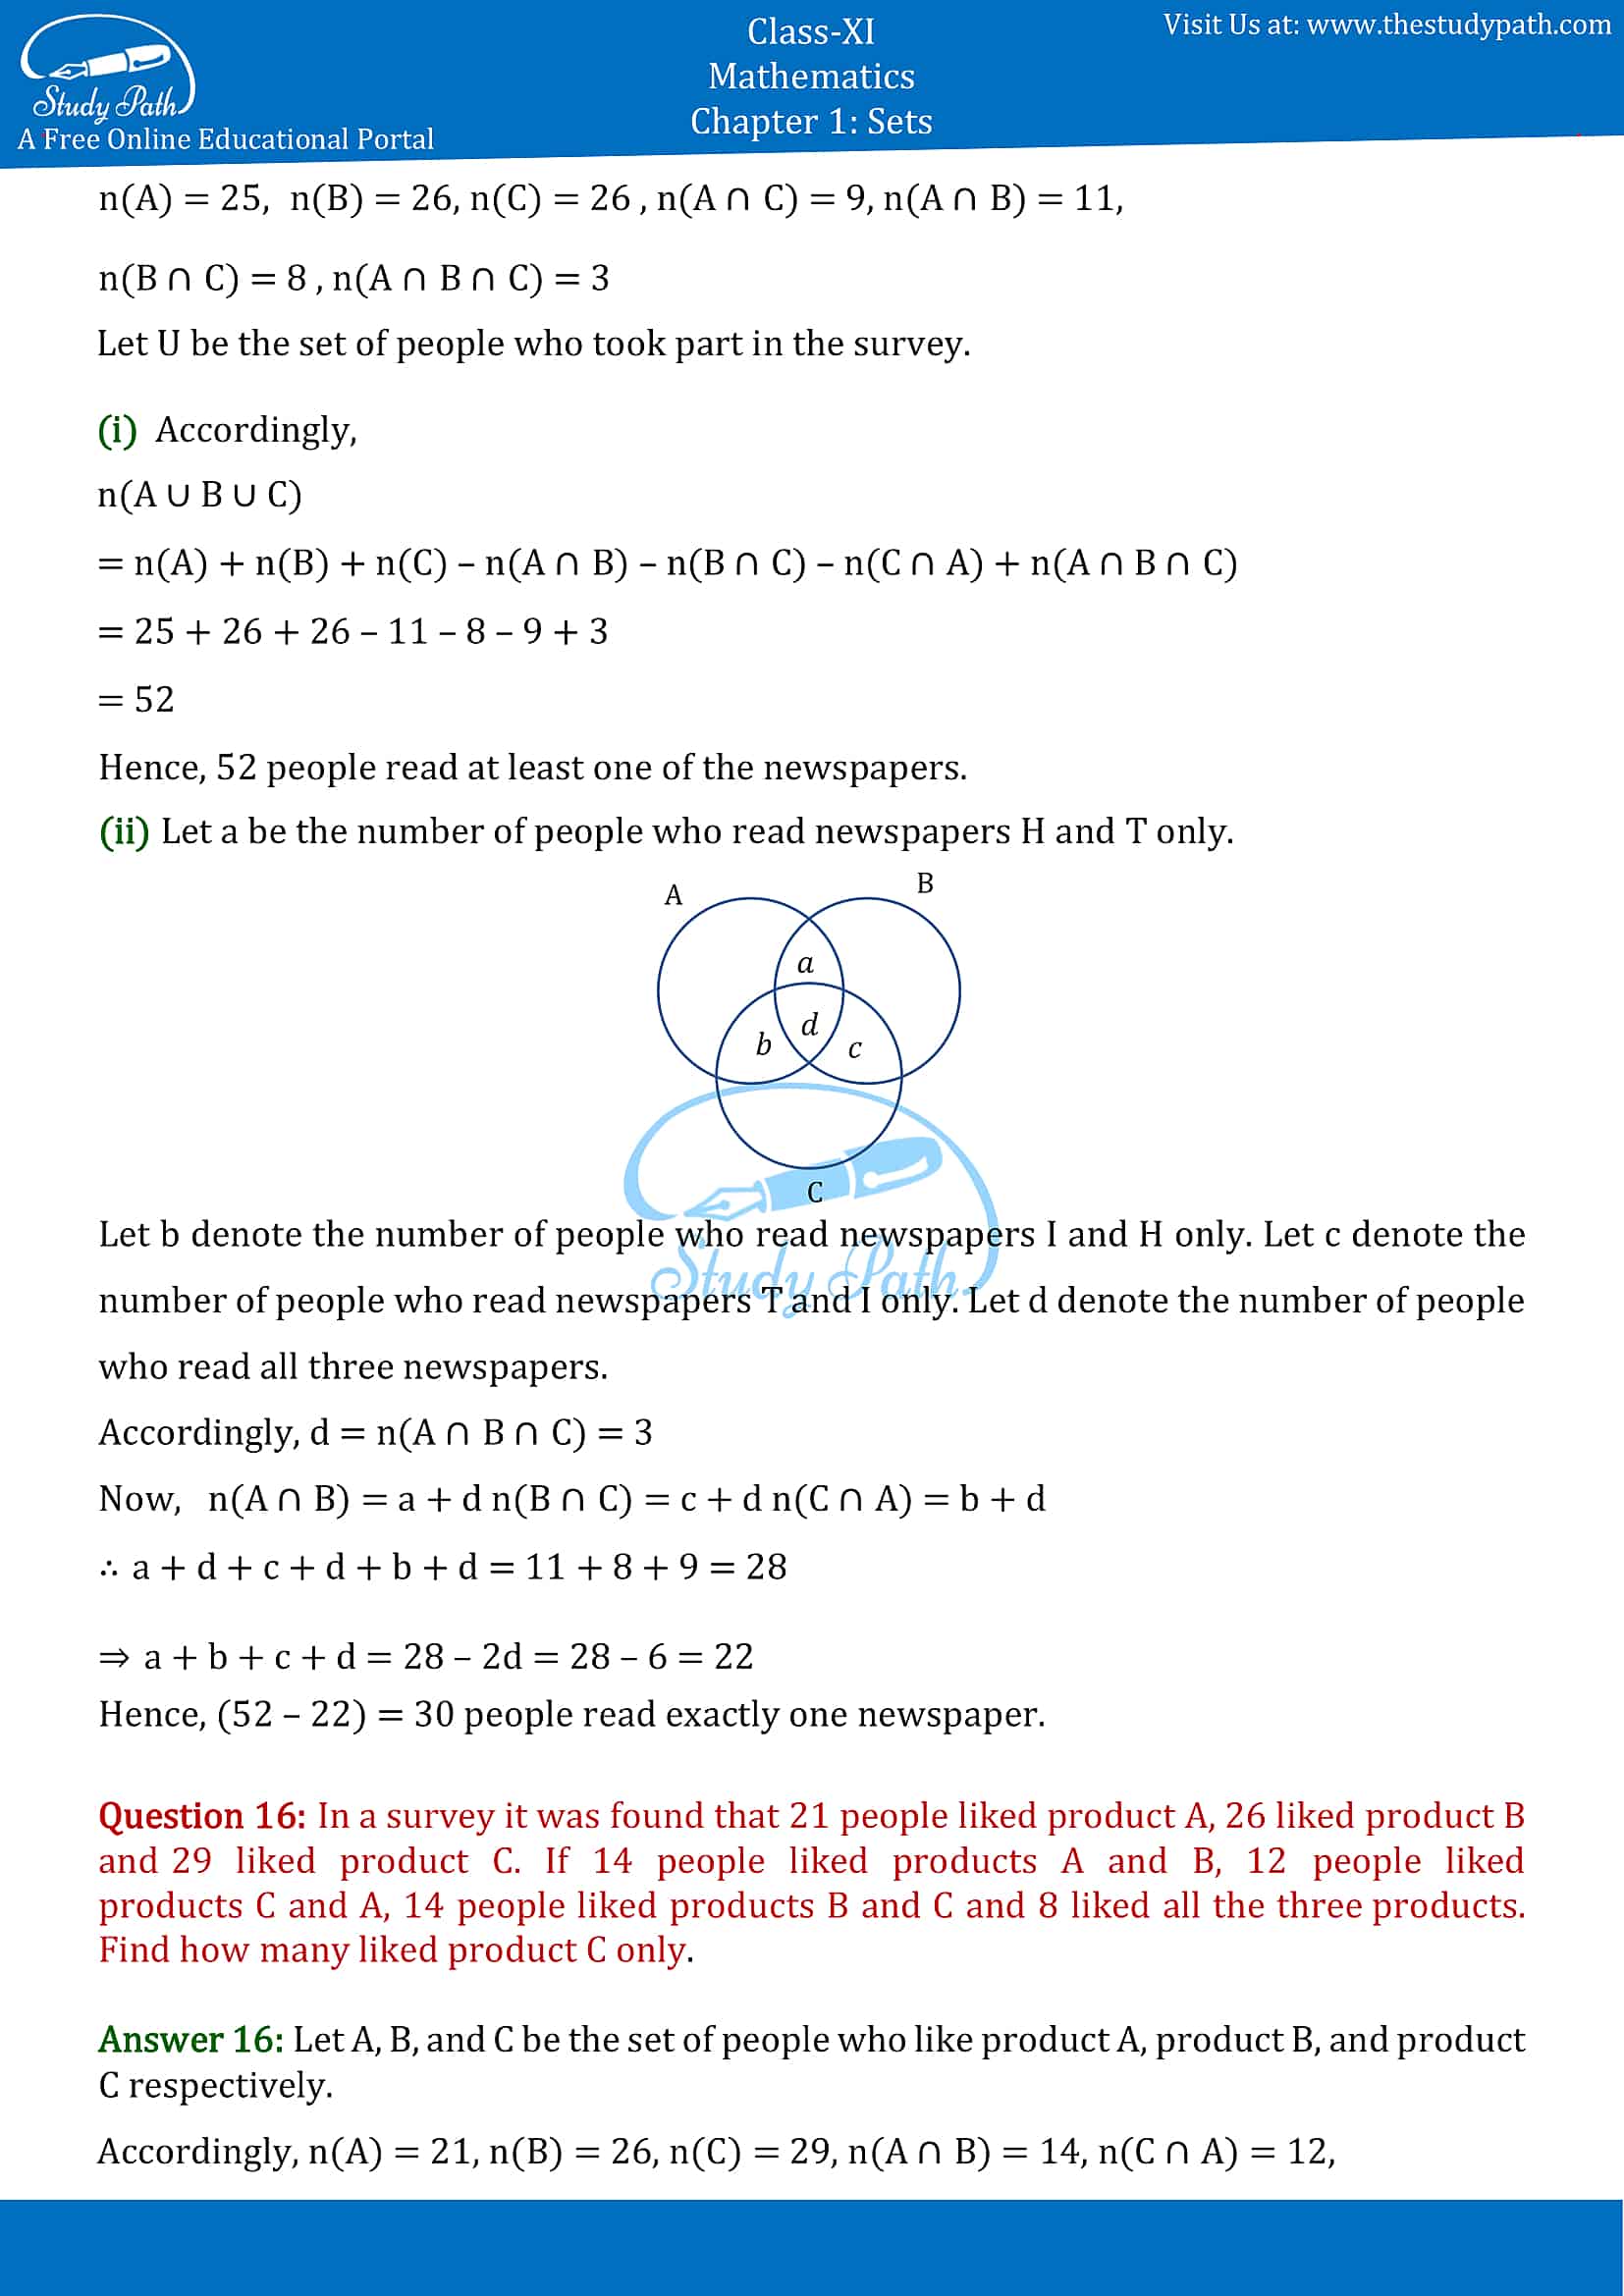 NCERT Solutions for Class 11 Maths chapter 1 sets Miscellaneous Exercise